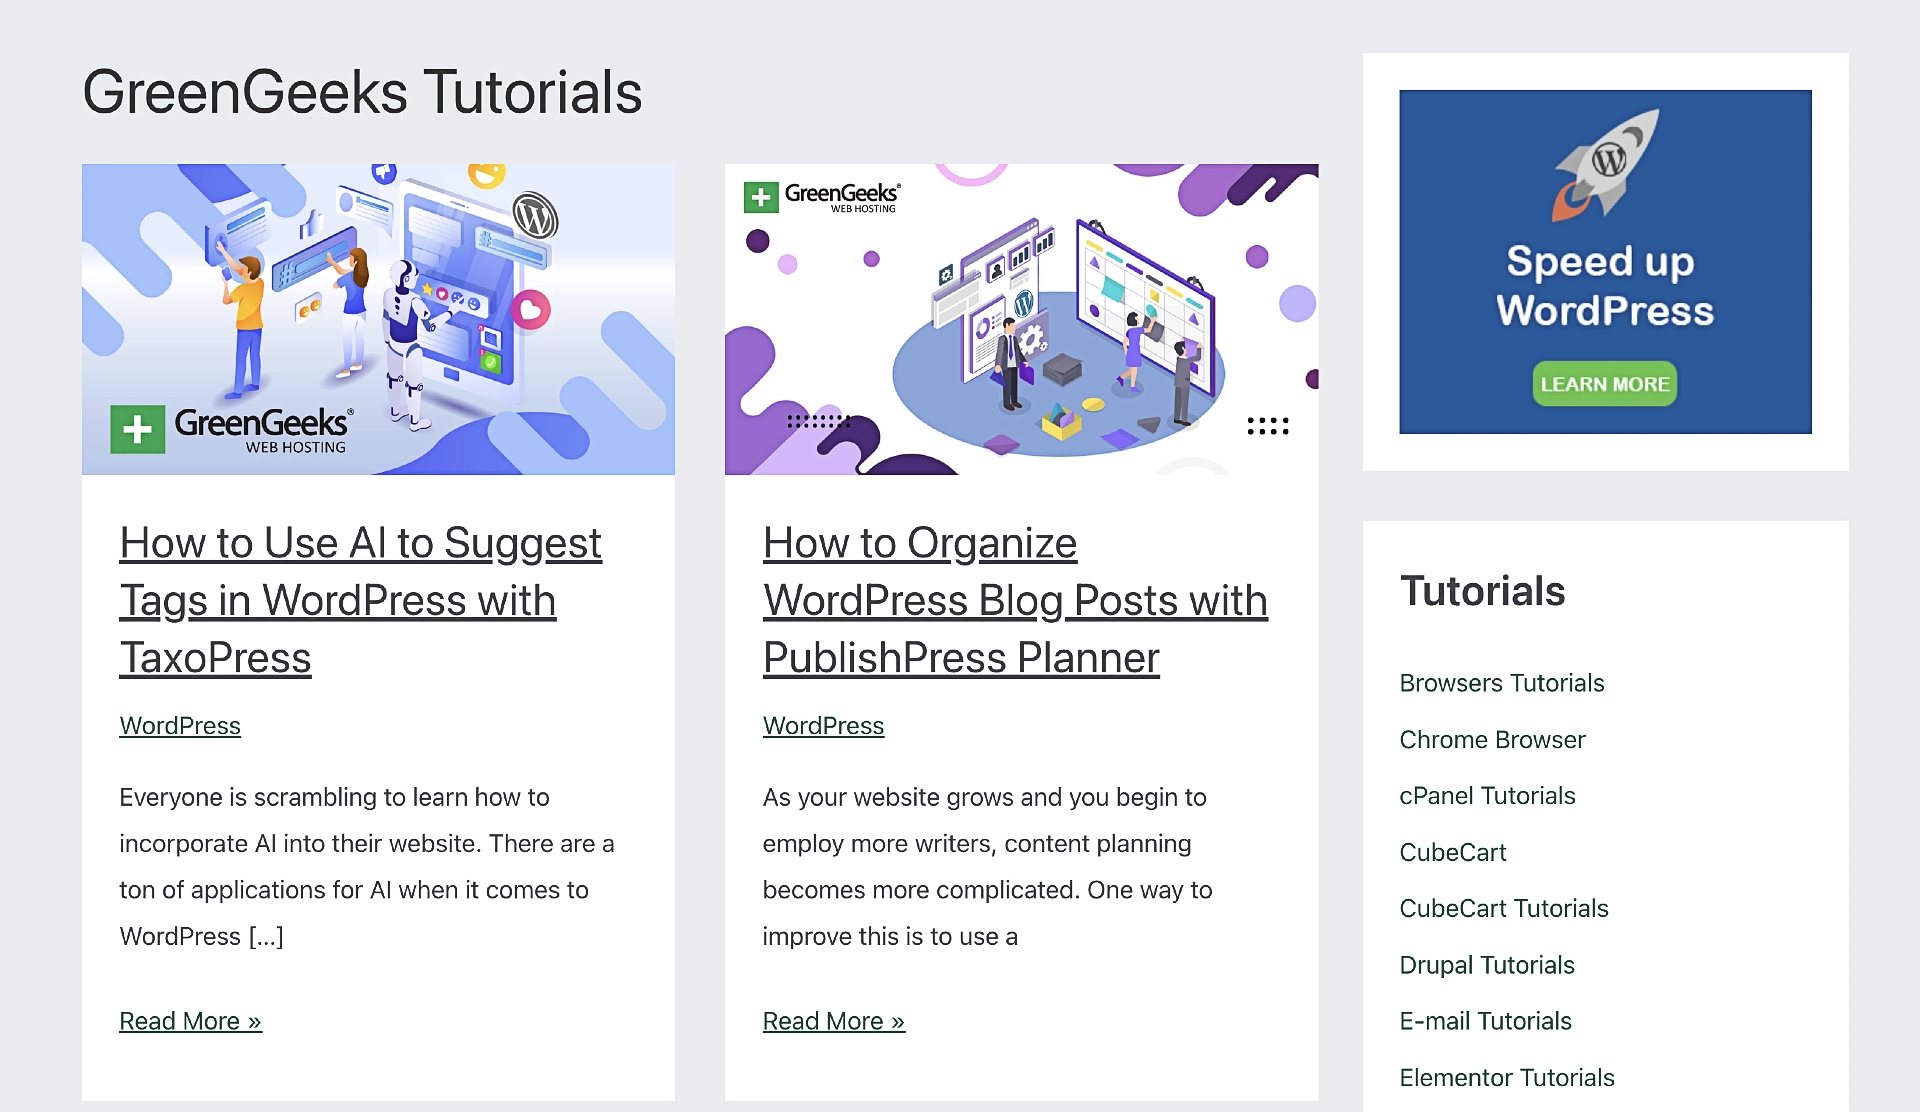 GreenGeeks tutorials section is useful to help you with a variety of aspects of your website.